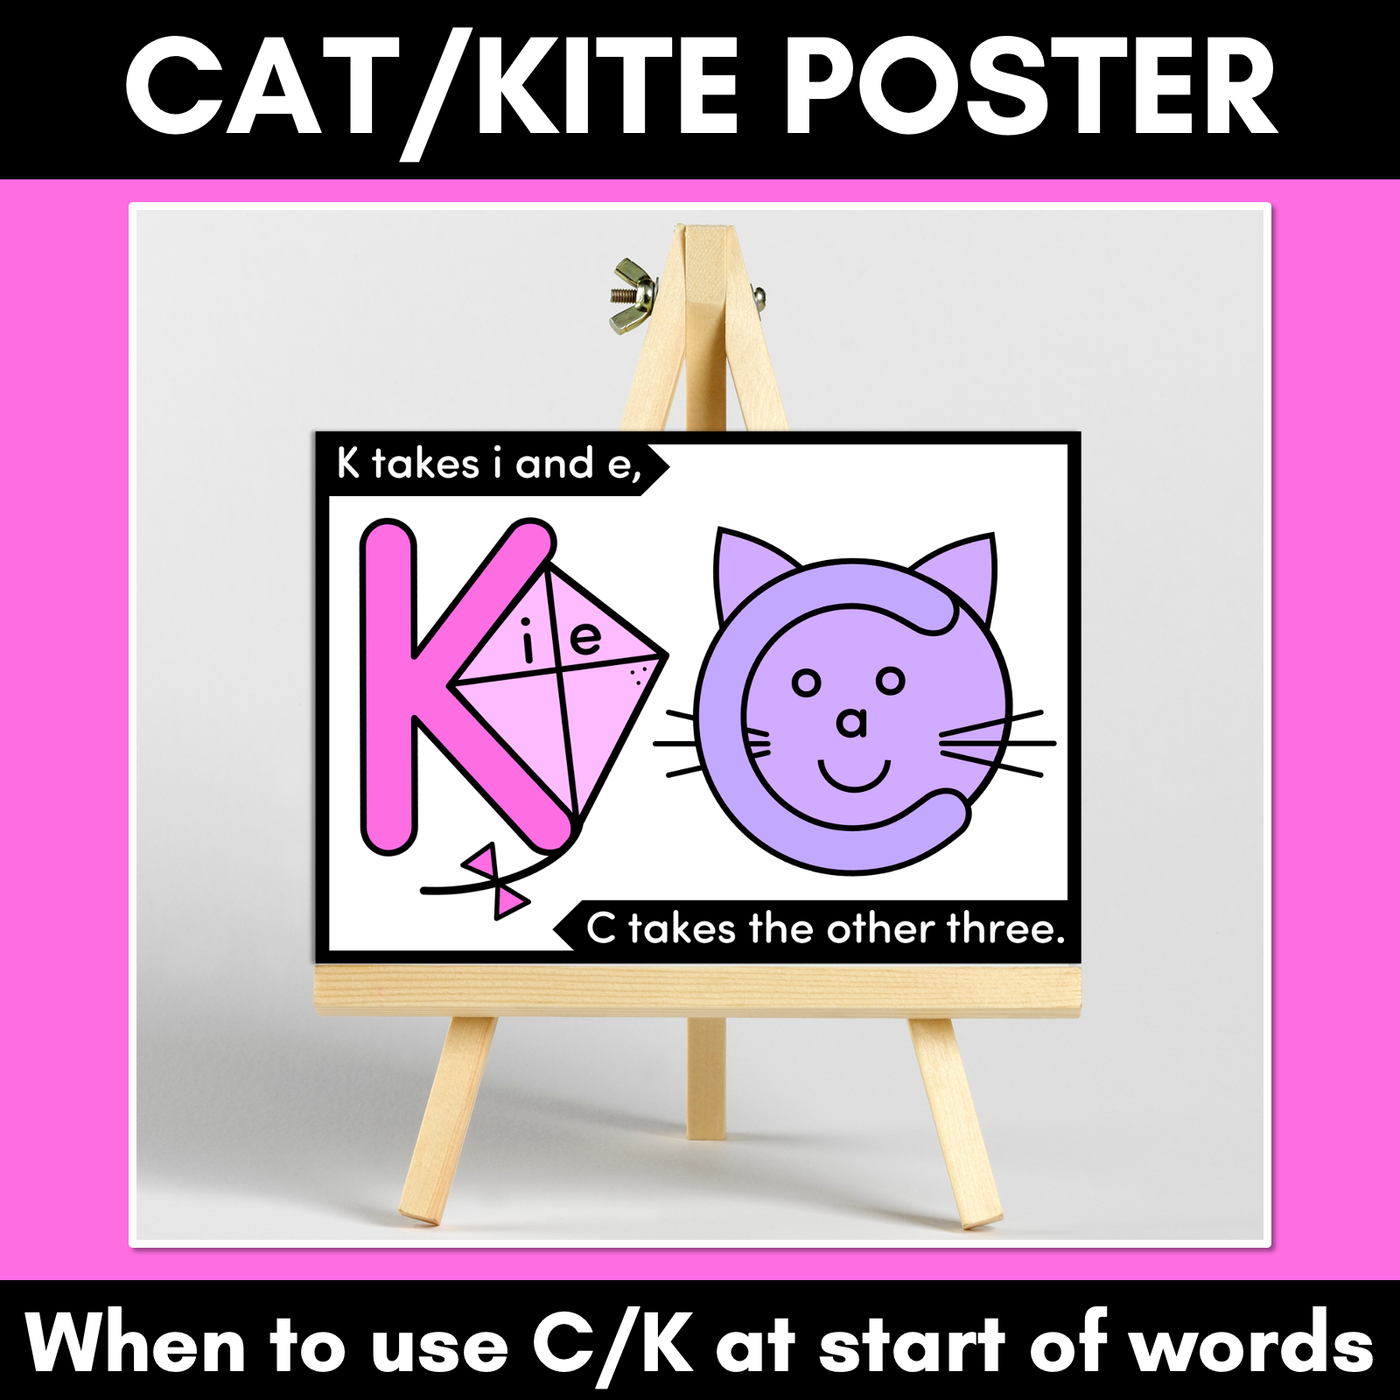 Cat or Kite POSTER - when to use C or K at the beginning of words